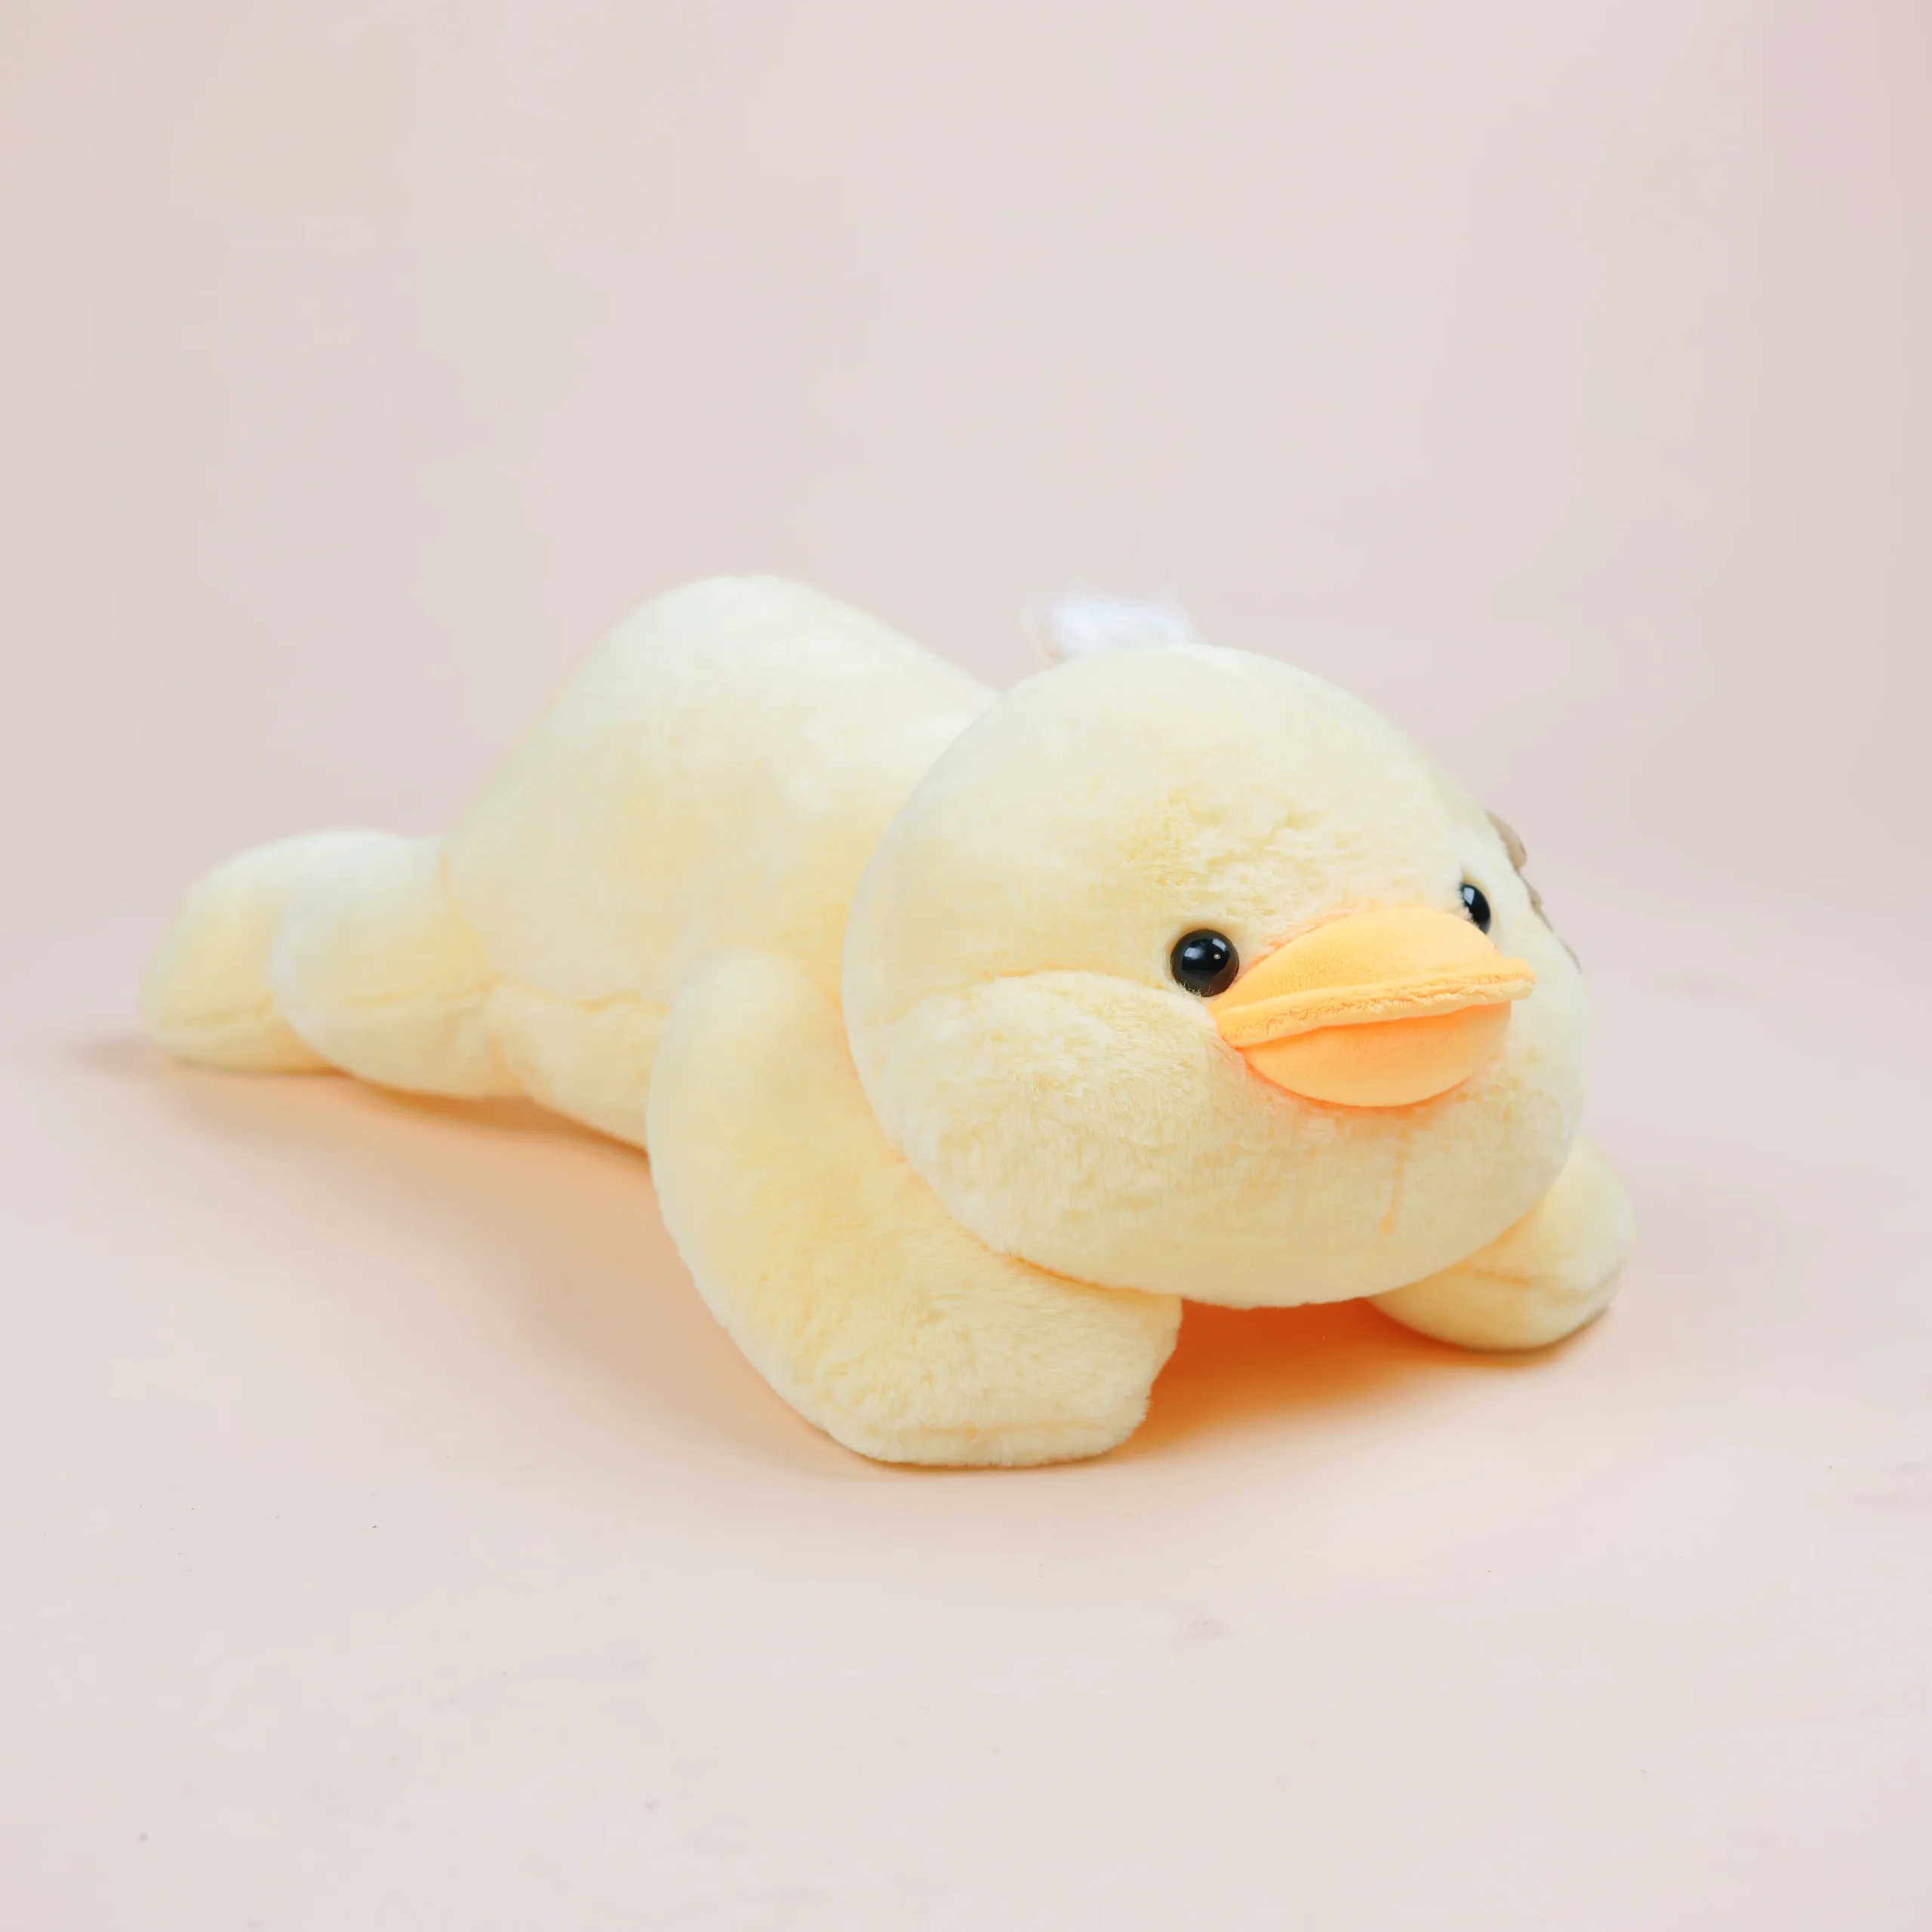 https://makbaktoy.com/wp-content/uploads/2023/03/small-super-soft-lying-duck-plush-toy-for-anxiety-scaled.webp